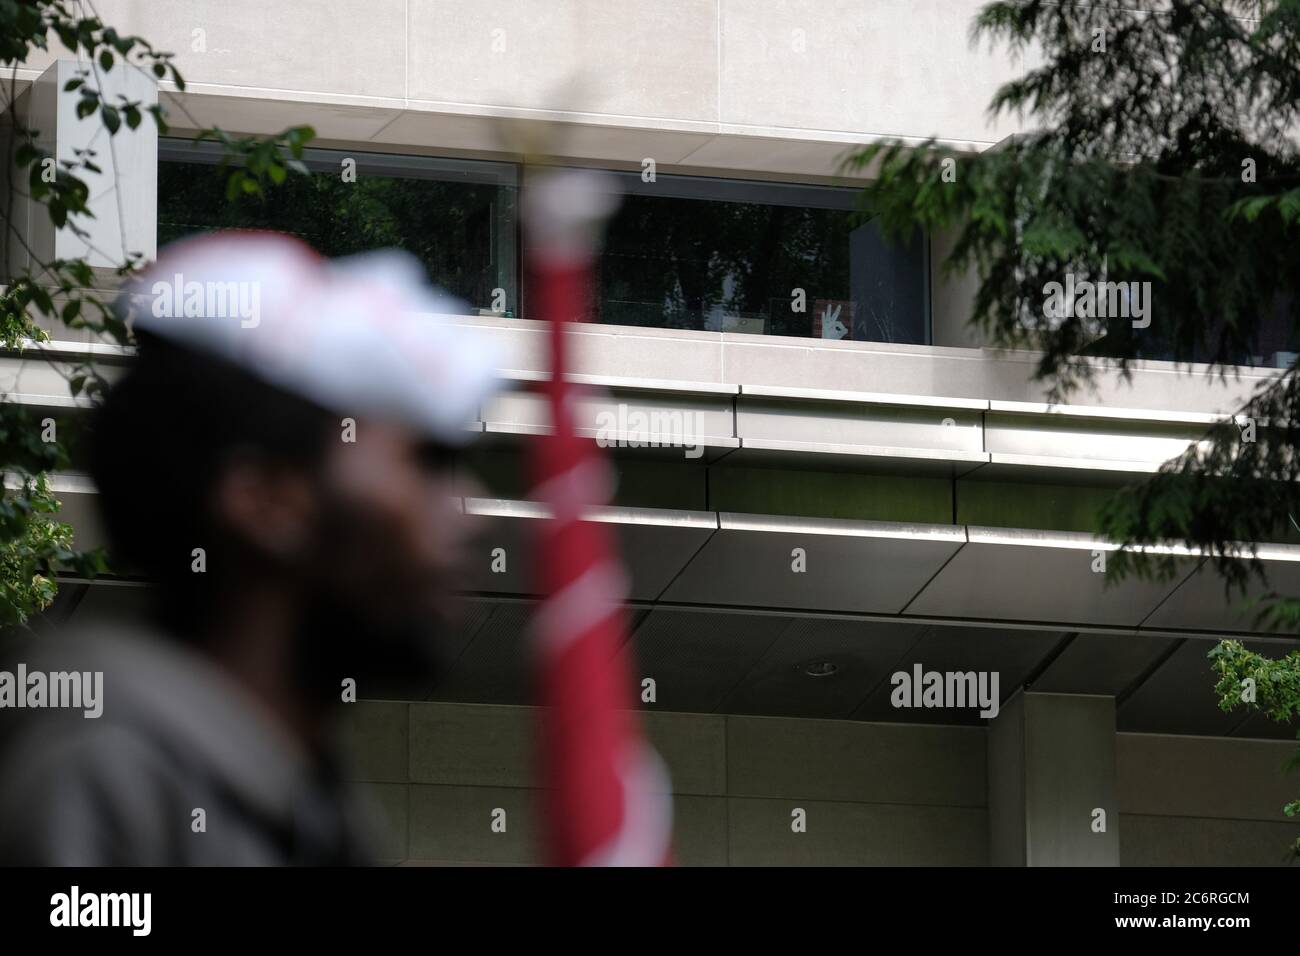 Portland, USA. 11th July, 2020. A protester stands in front of an 'okay' gesture on repeated rows of the number 3, outwardly displayed from the Mark O. Hatfield federal courthouse in Portland, Ore., on July 11, 2020. Last year the Anti-Defamation listed the gesture as a symbol of hate as a result of it's use by white supremacists who falsely promoted it to represent 'wp' or 'white power' on the website 4chan beginning in 2017. (Photo by Alex Milan Tracy/Sipa USA) Credit: Sipa USA/Alamy Live News Stock Photo